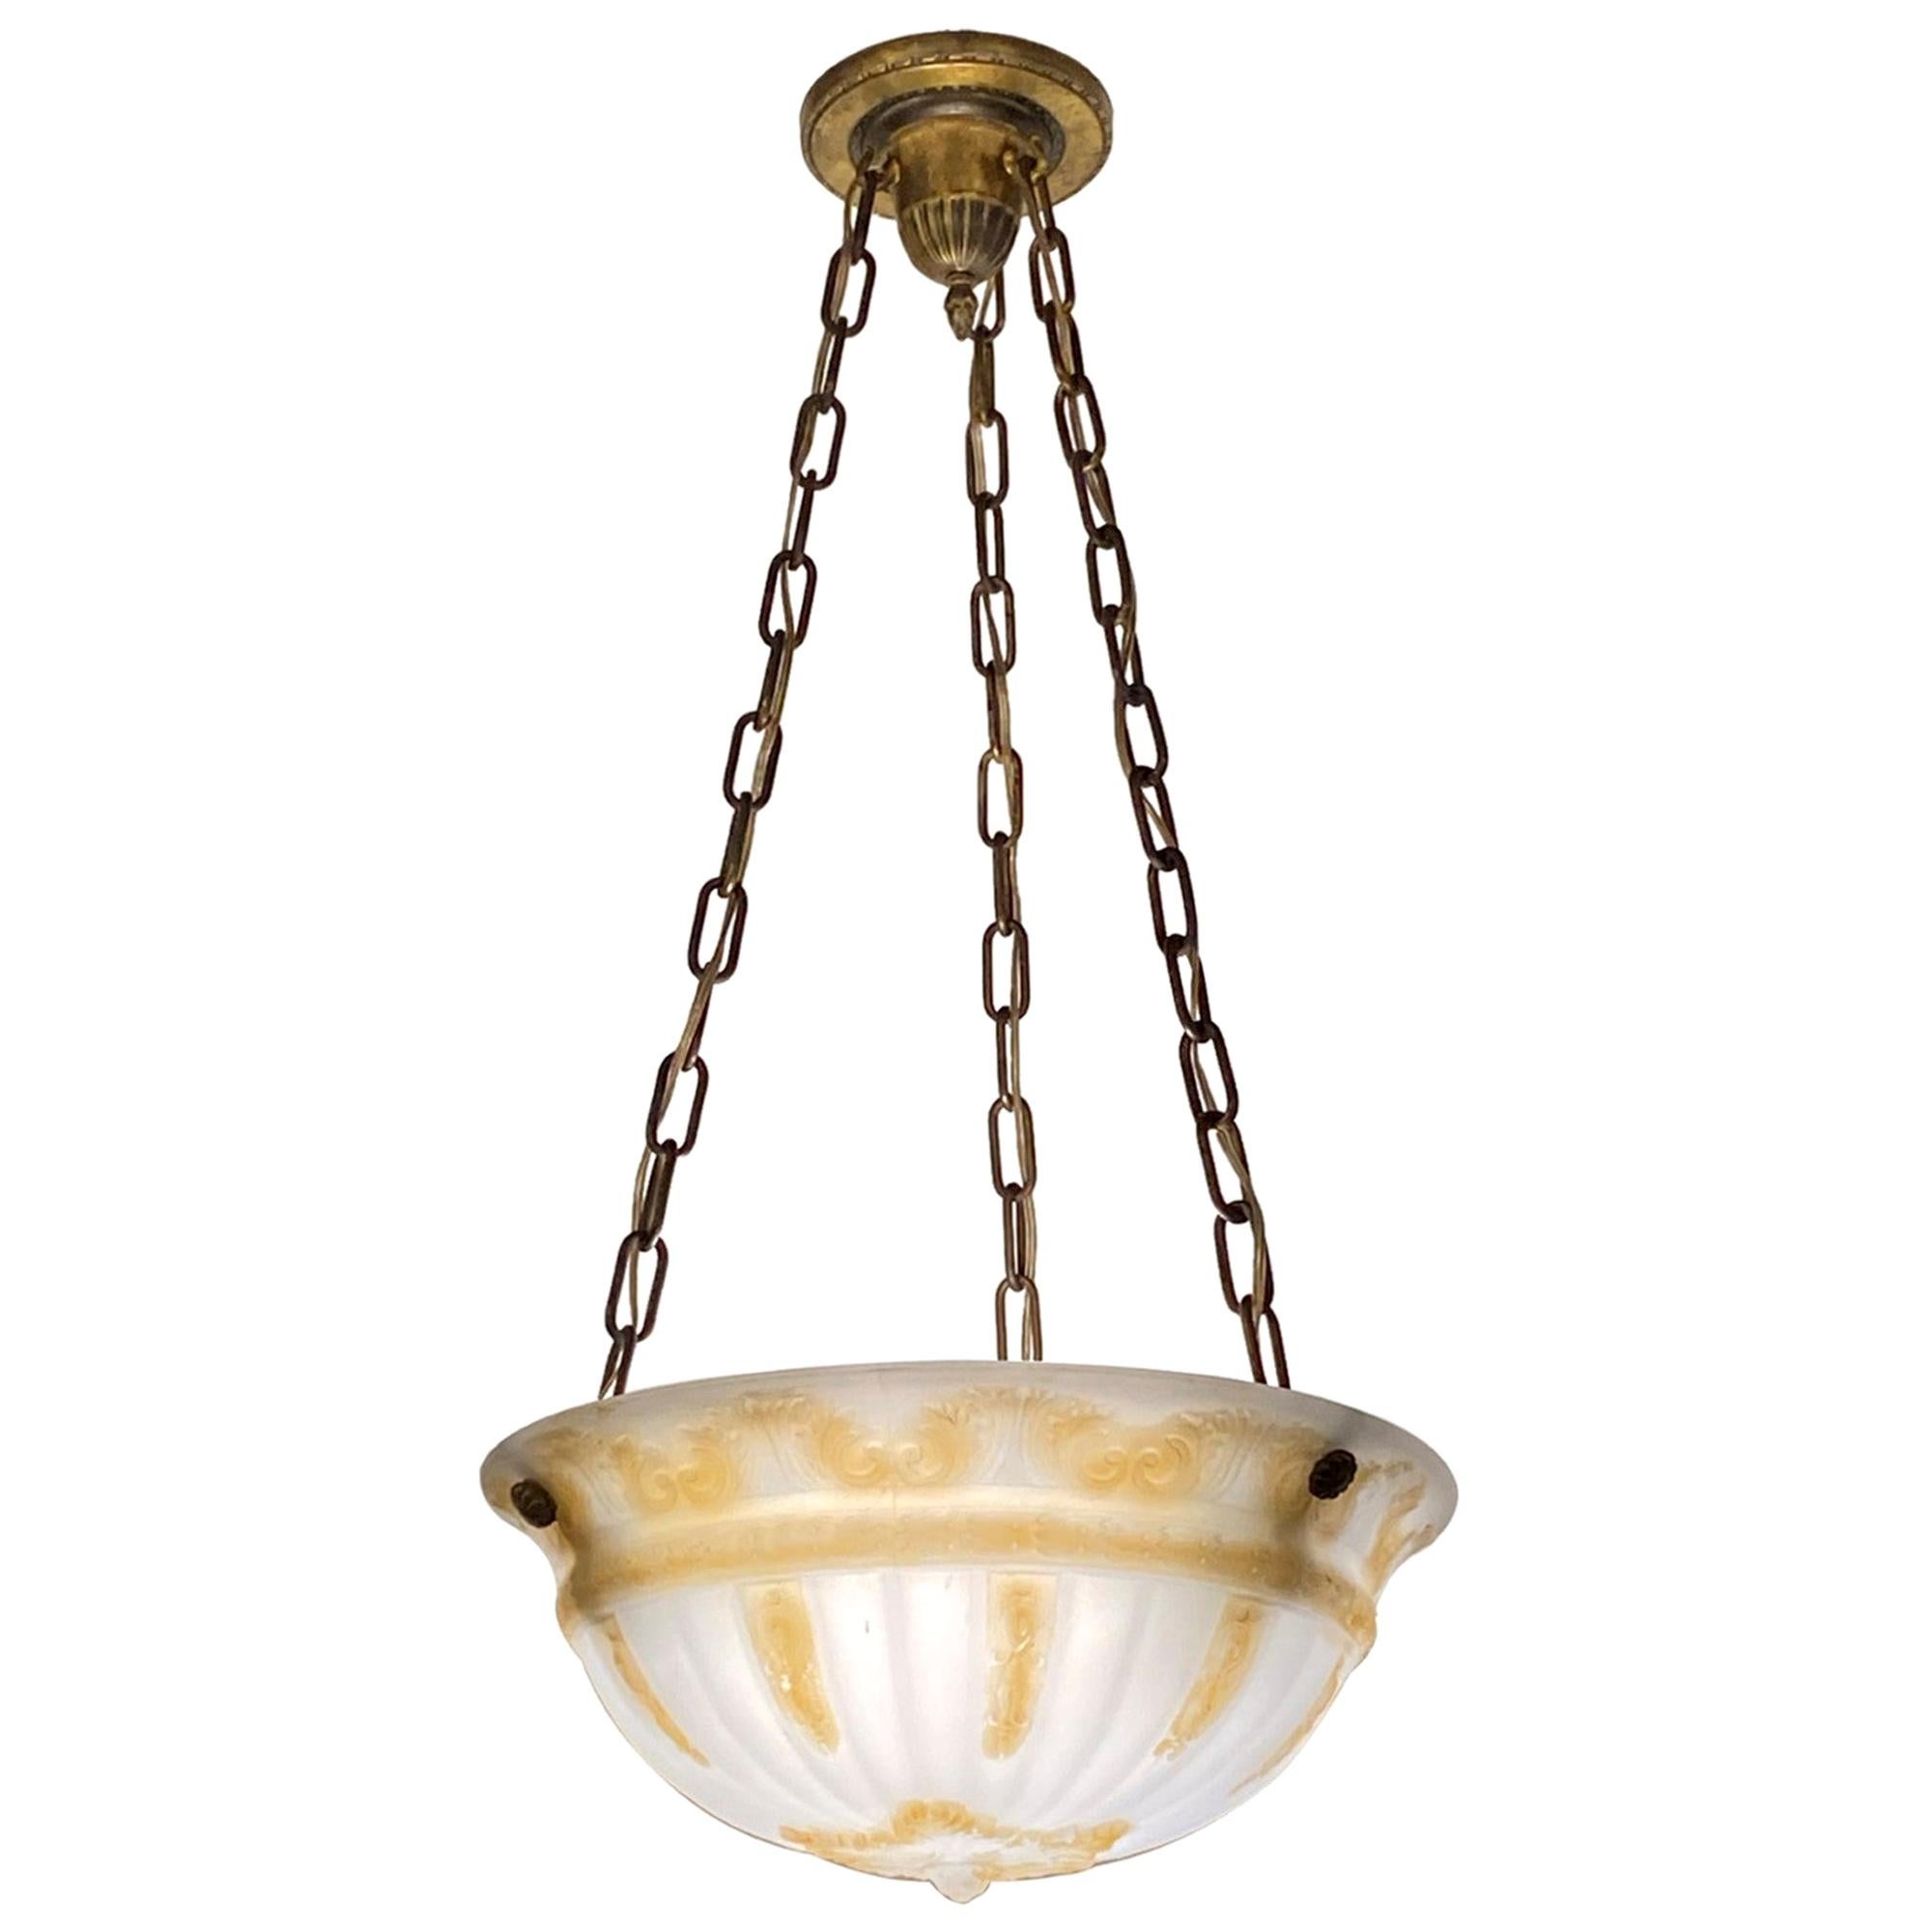 Early 1900s Victorian Hanging Dish Pendant Light with Cast Glass, Brass Hardware